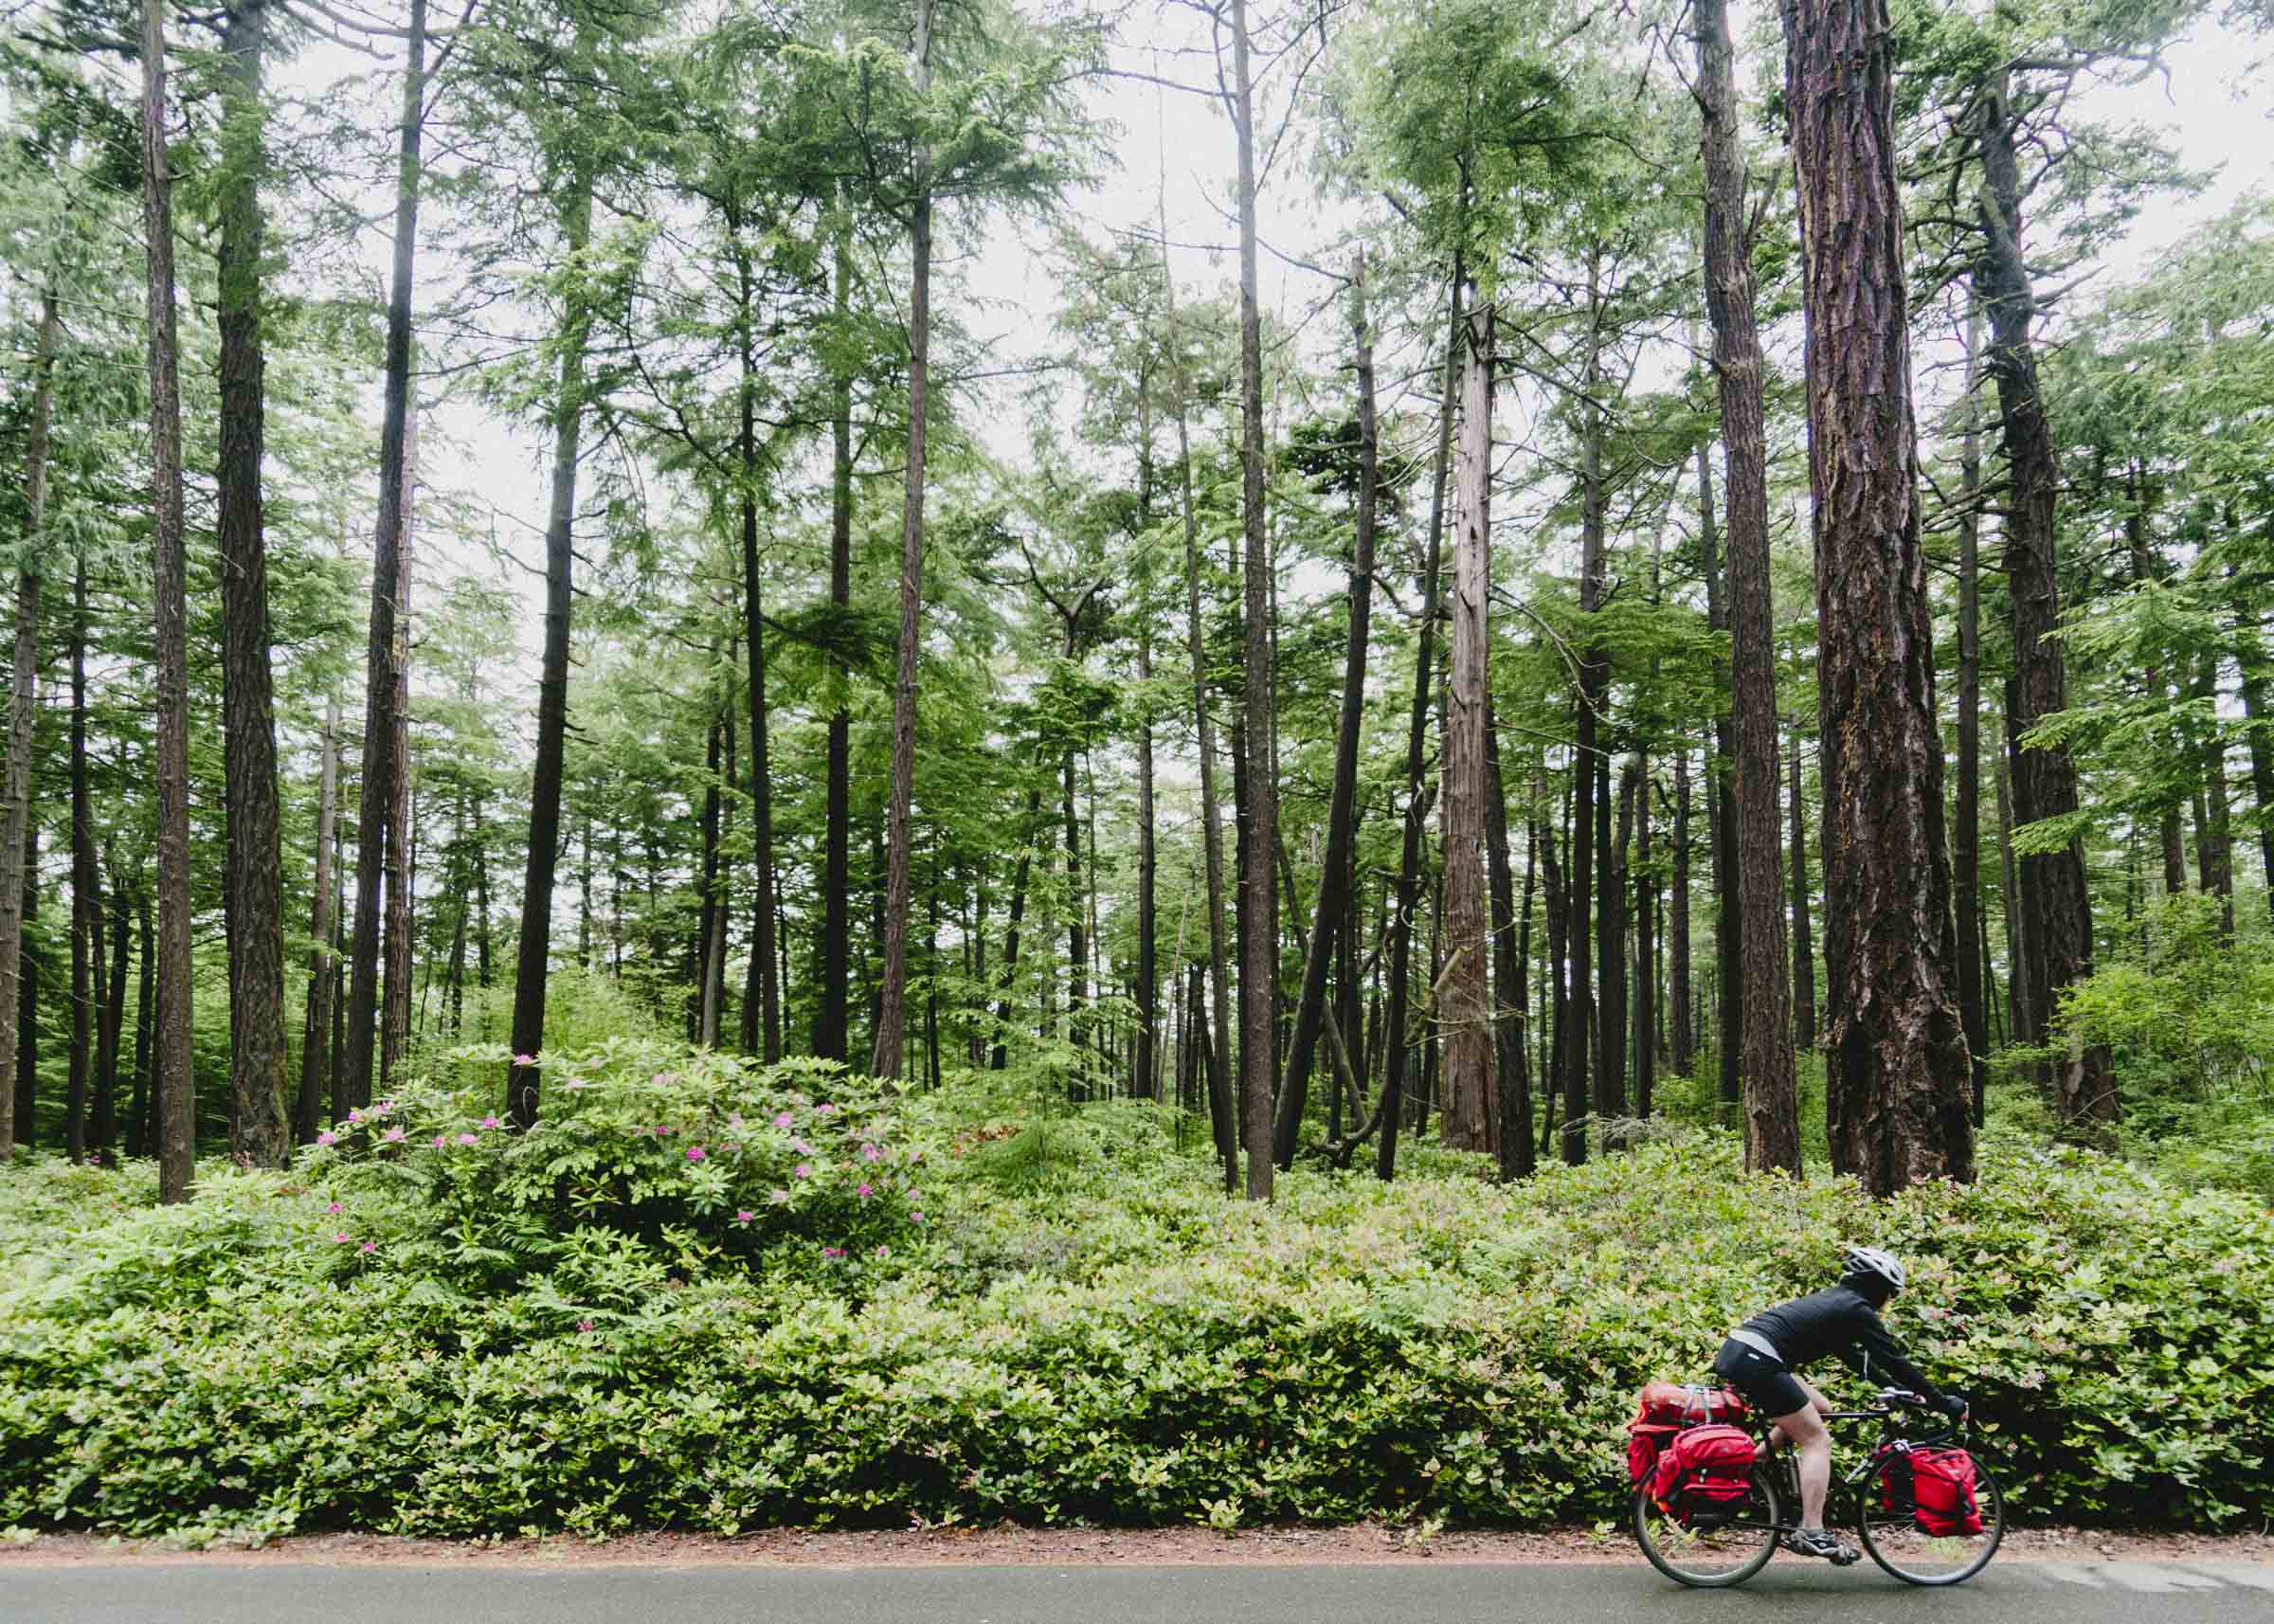 Riding through rhododendron forest in Washington